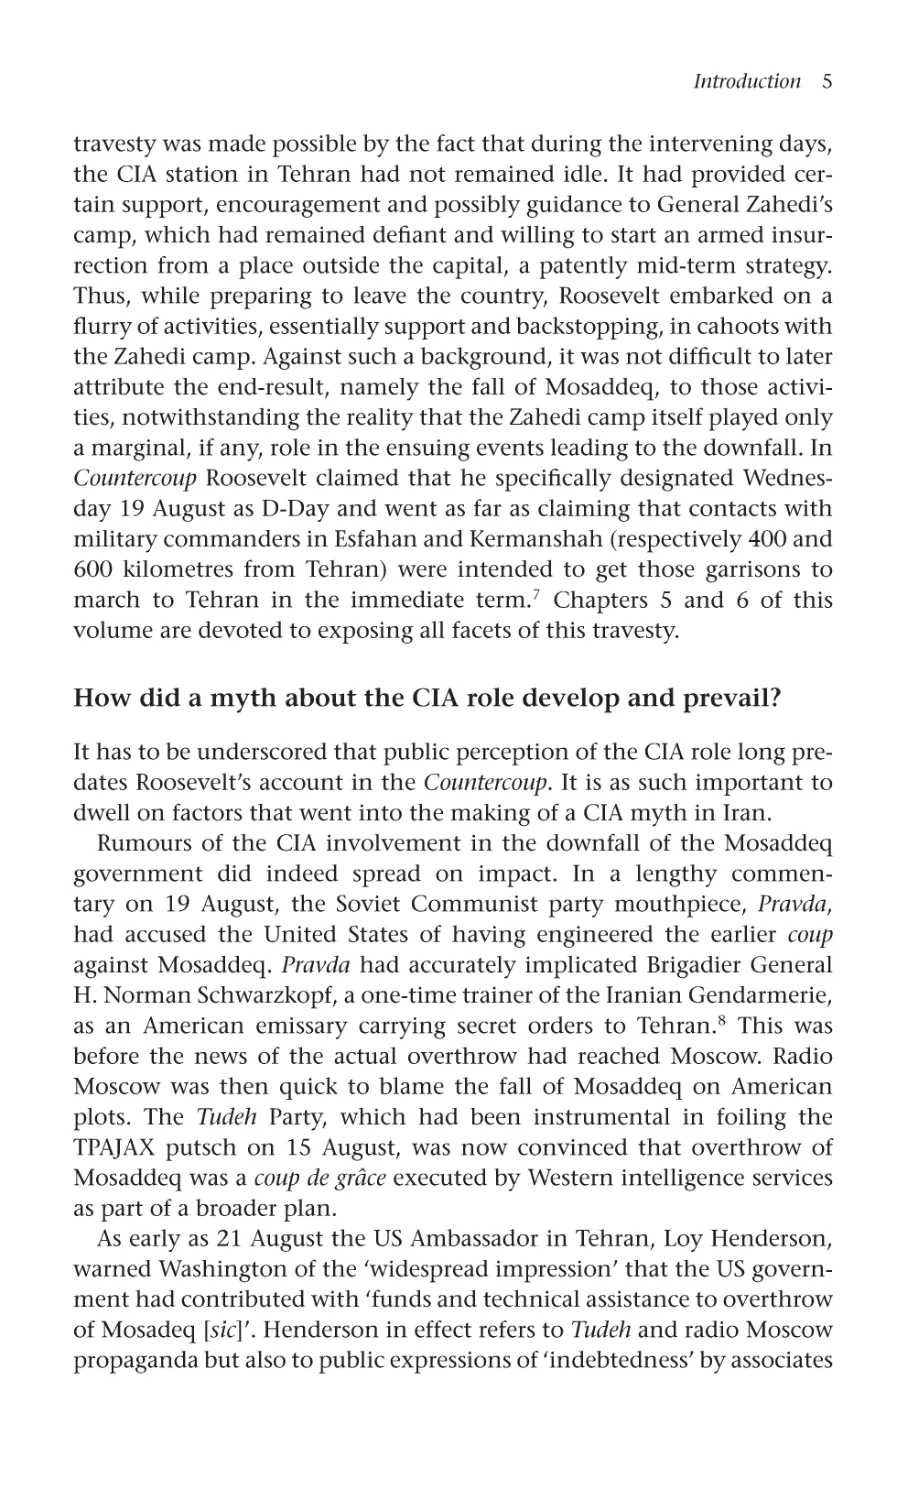 How did a myth about the CIA role develop and prevail?